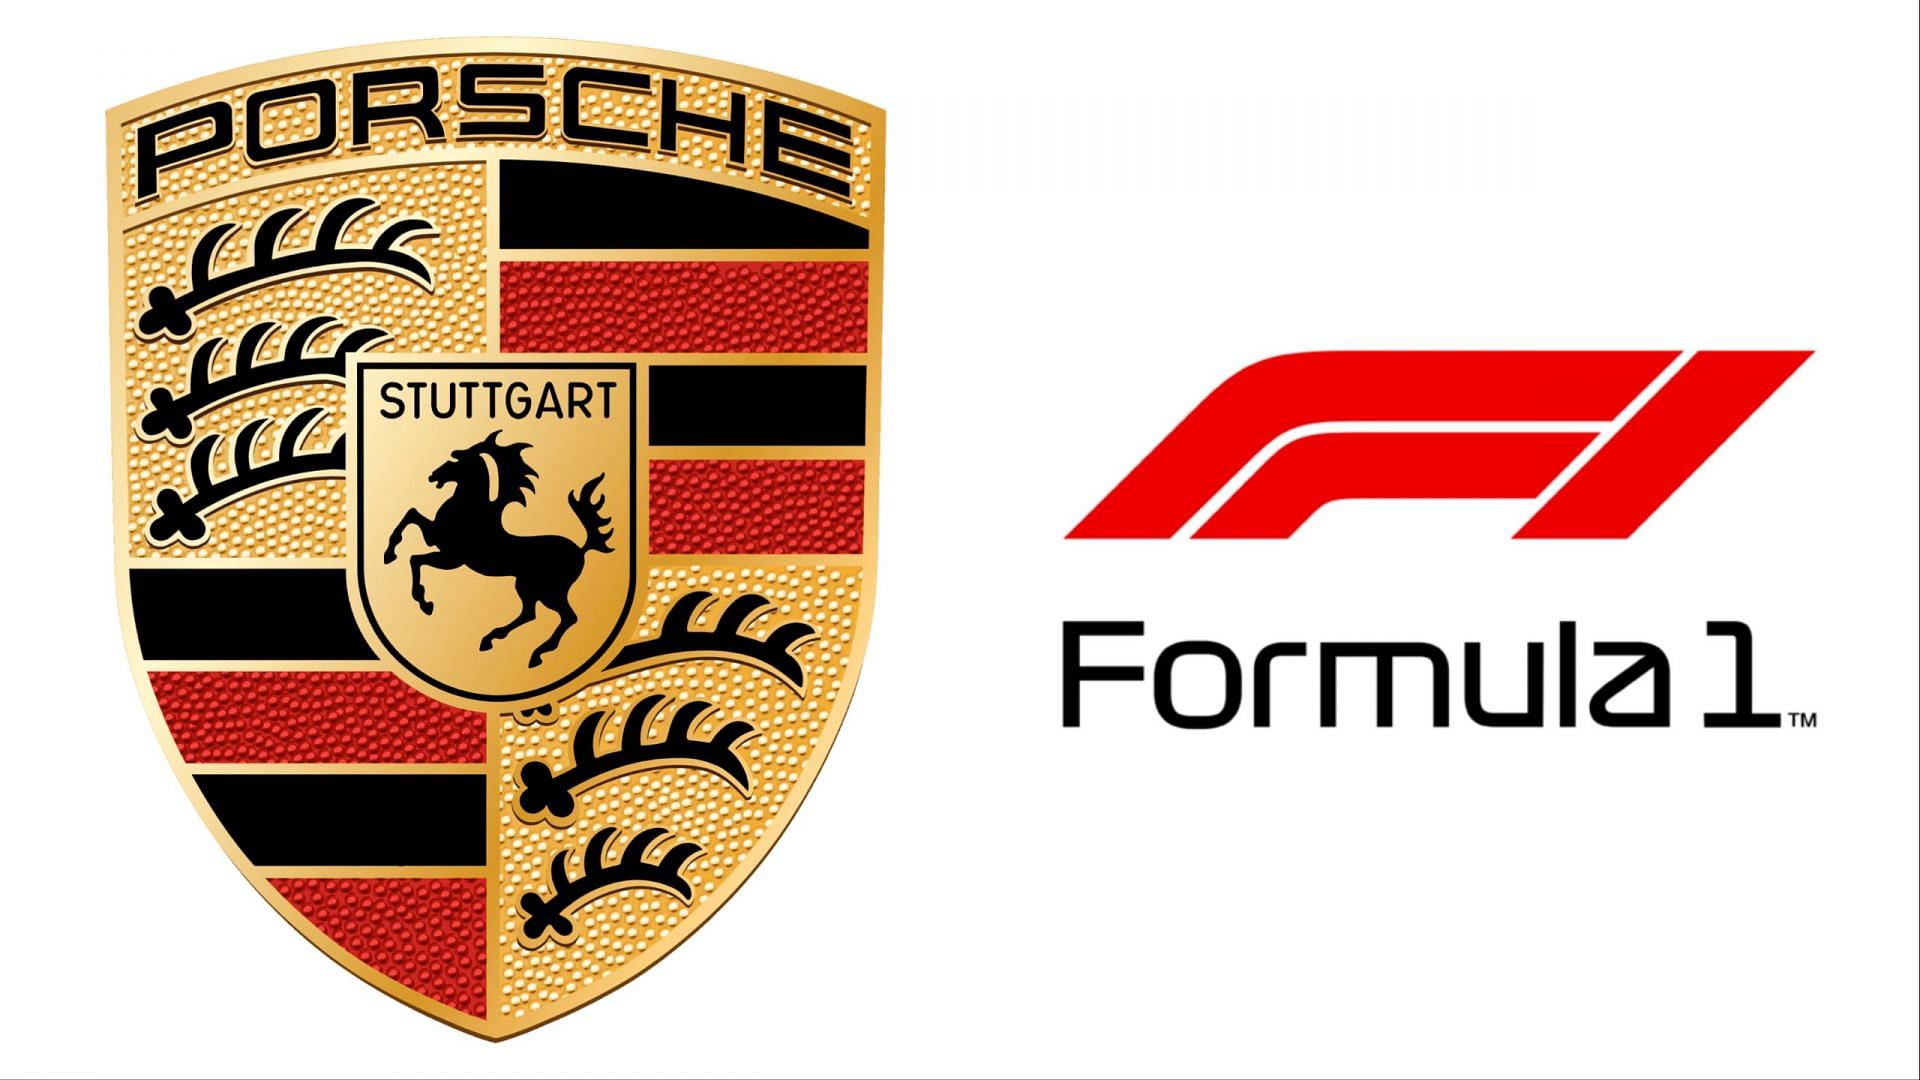 Porsche will not join the F1 Grid from the 2026 season